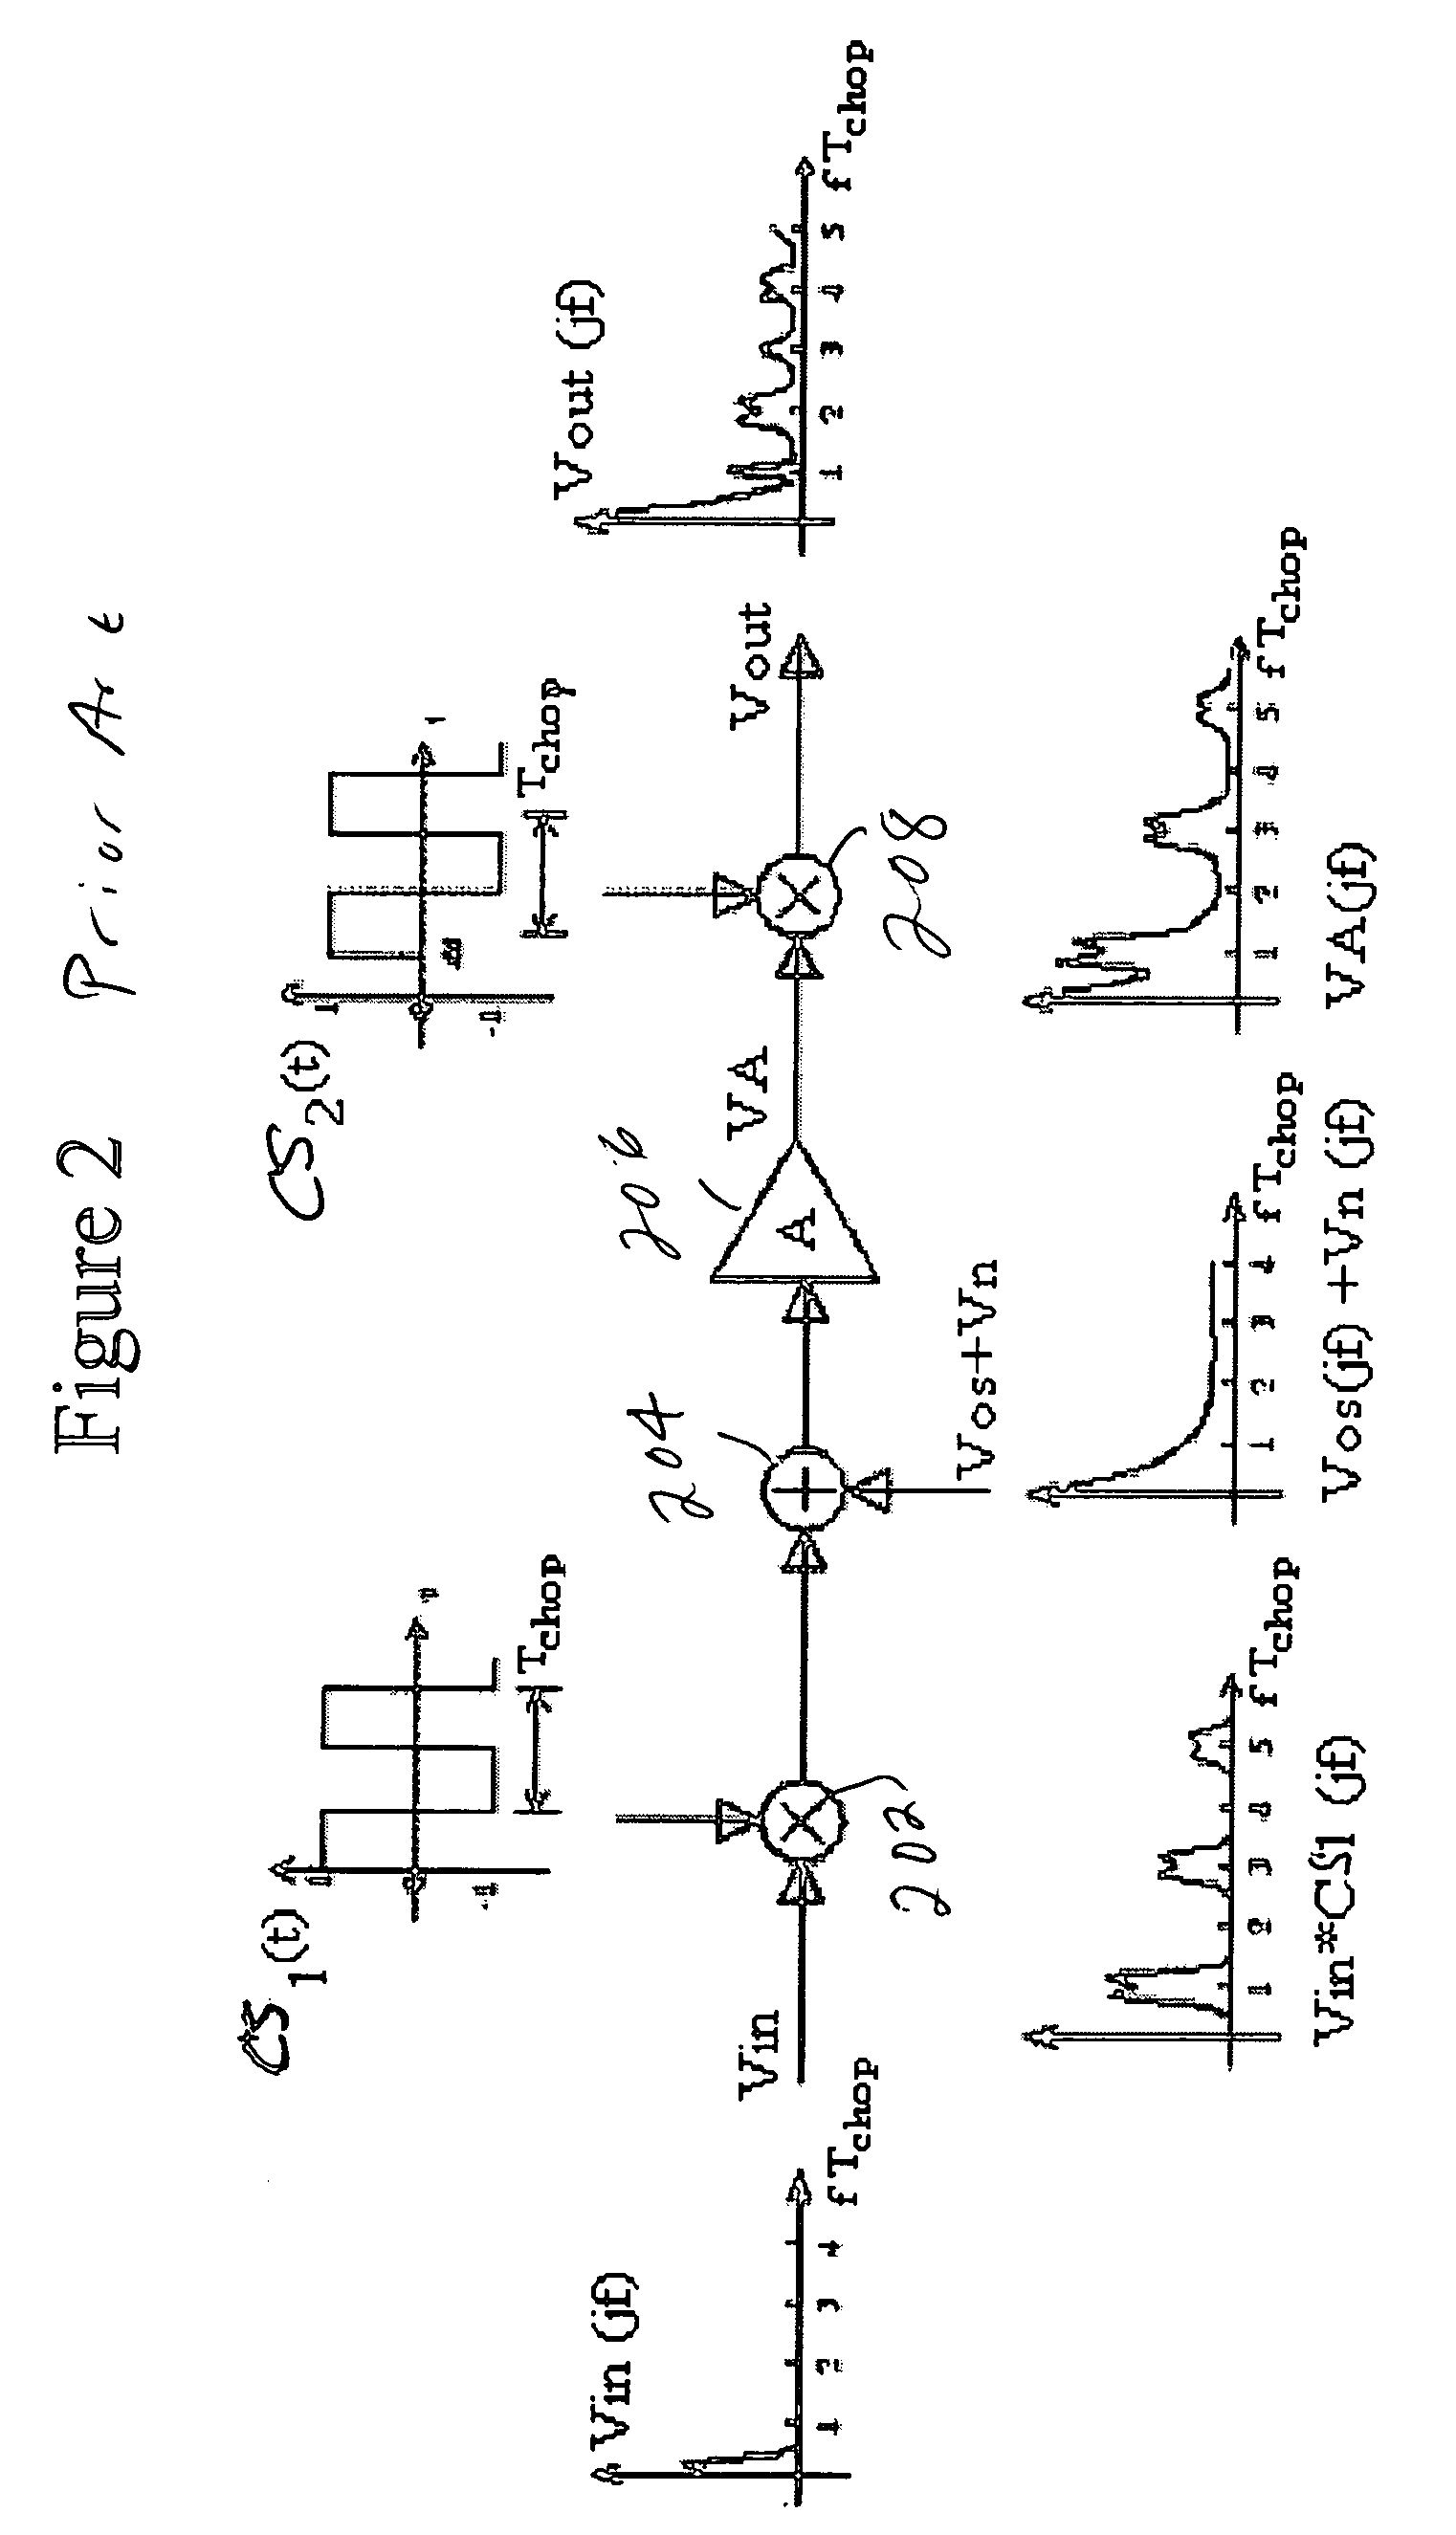 Switched-capacitor high-pass mirrored integrator